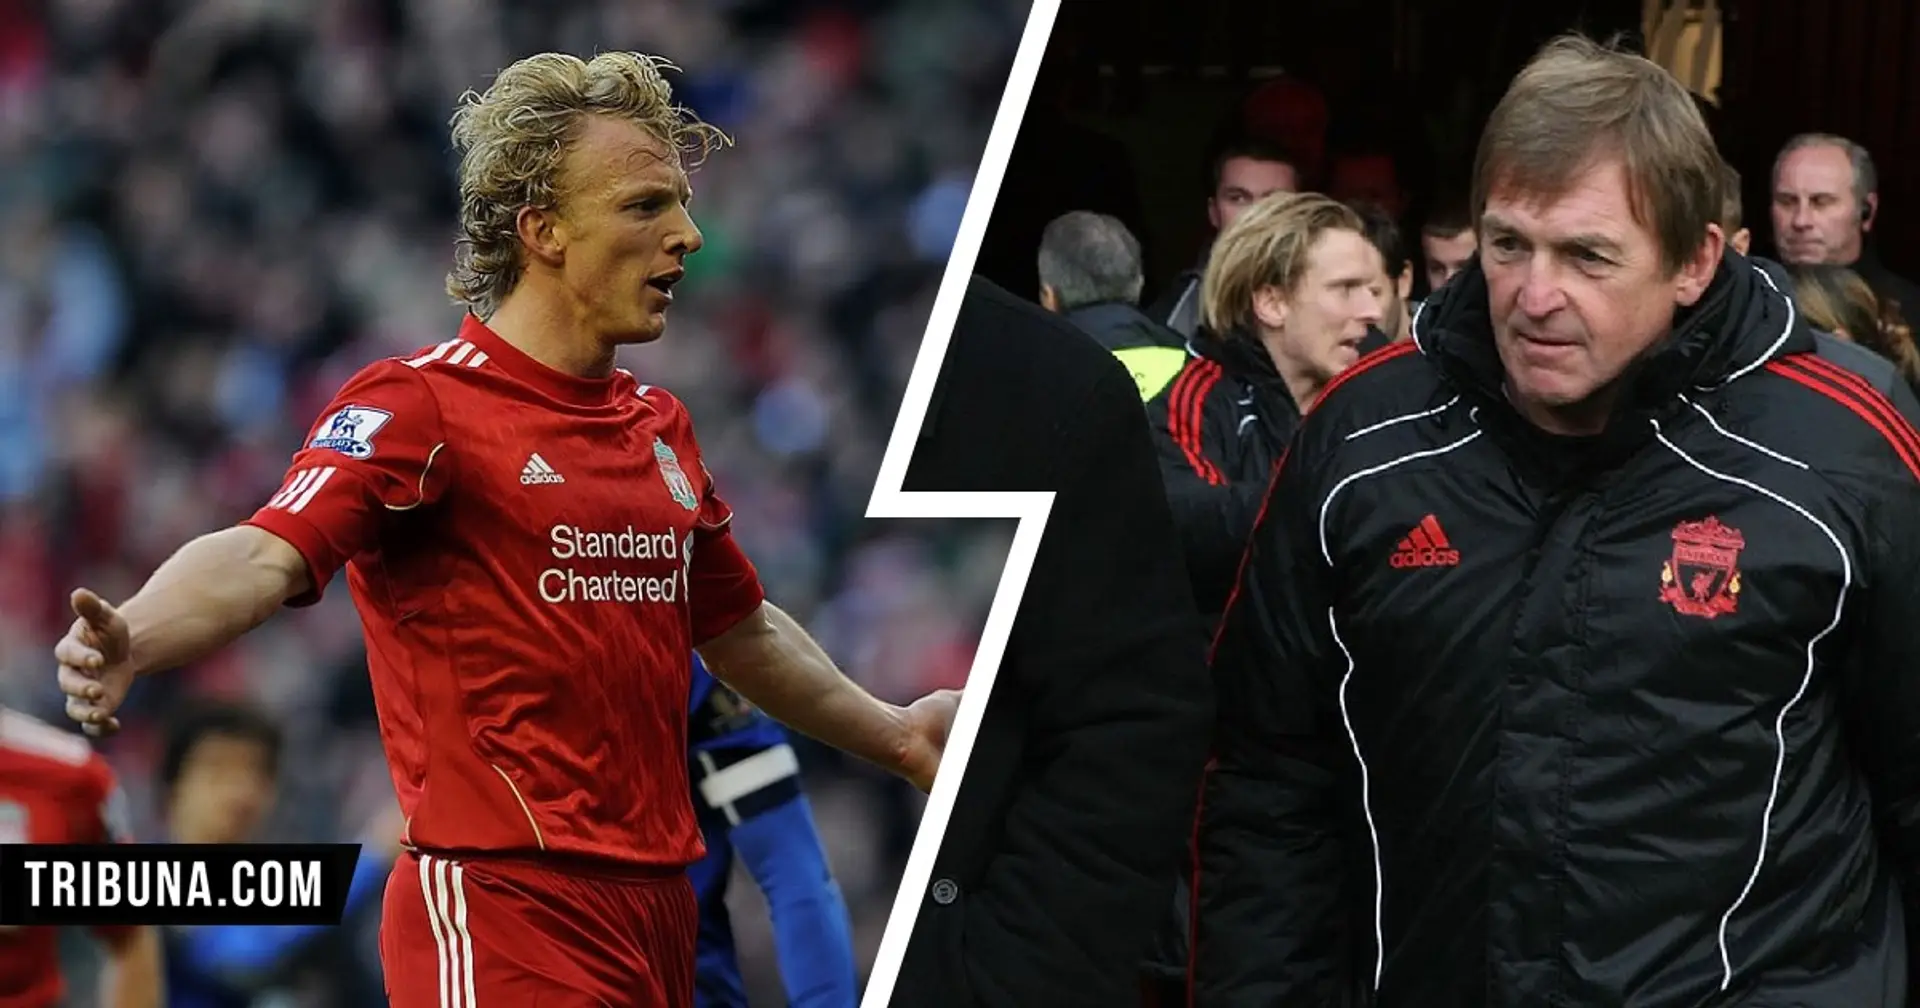 3 classic Liverpool vs Man United FA Cup clashes from the past 15 years